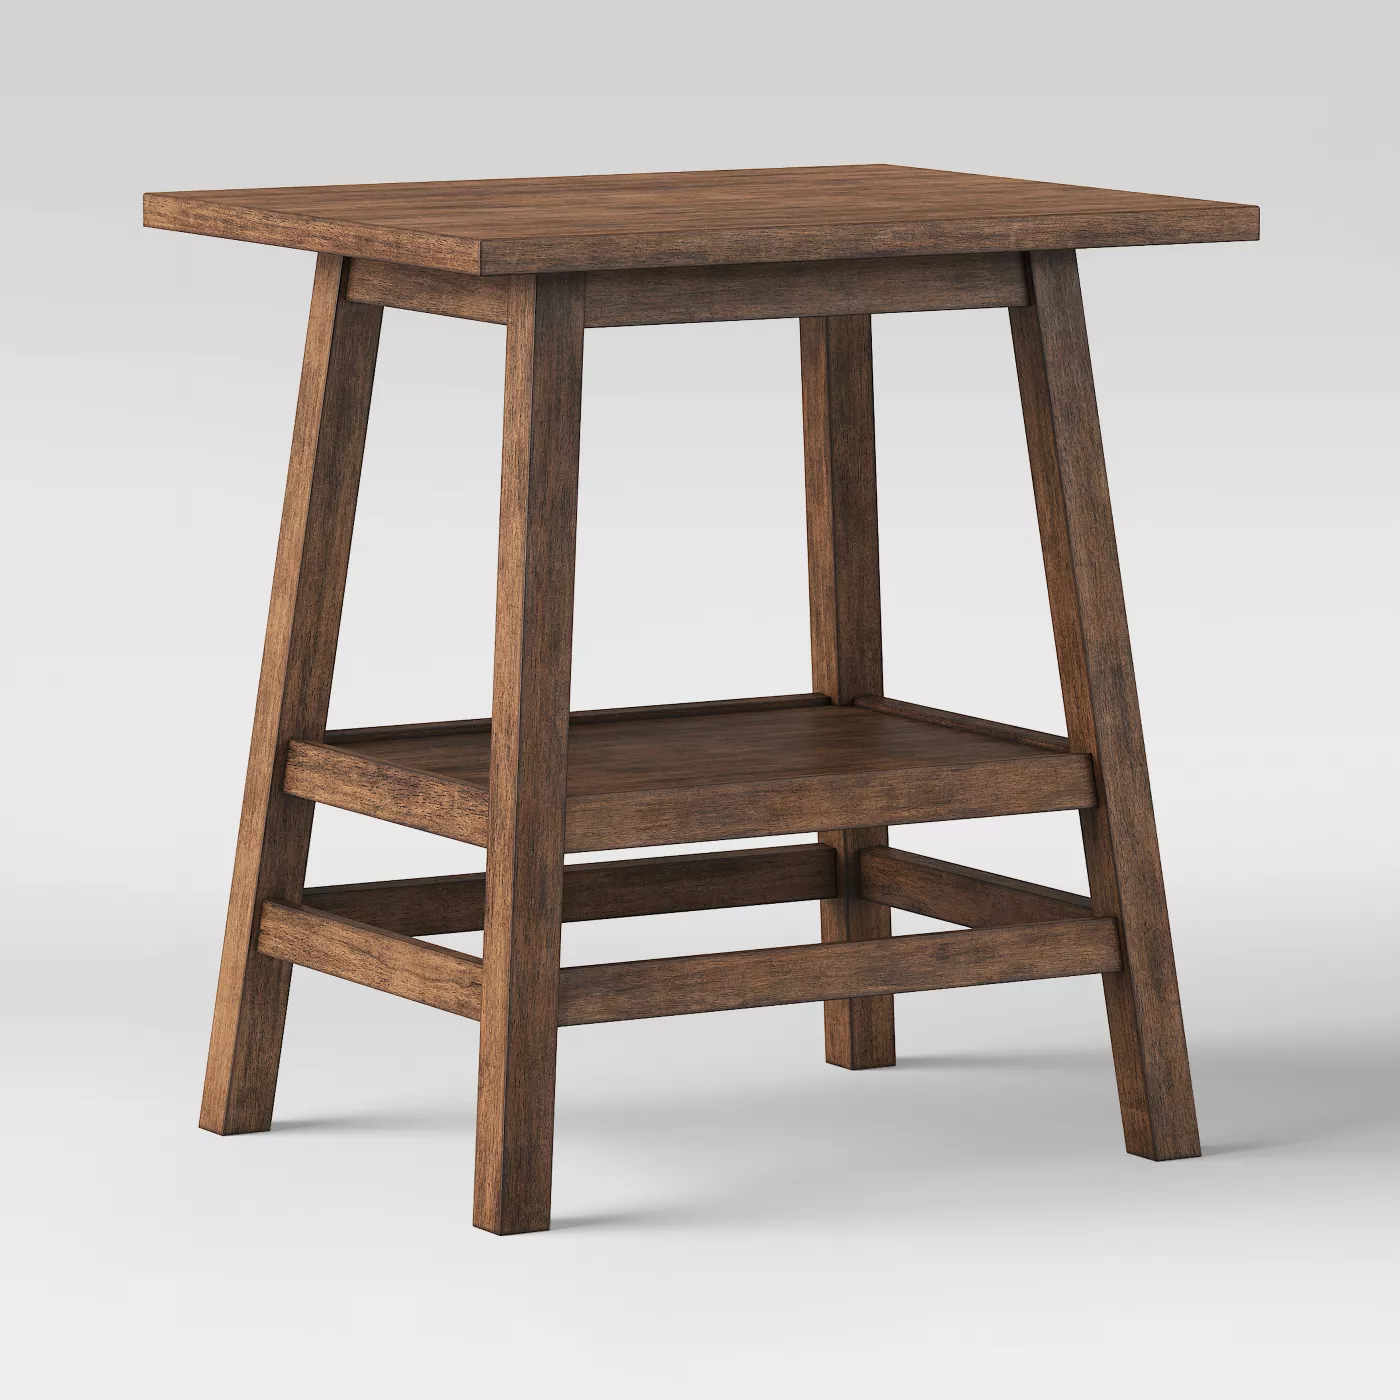 Haverhill Wood End Table - Threshold™ - image 3 of 6